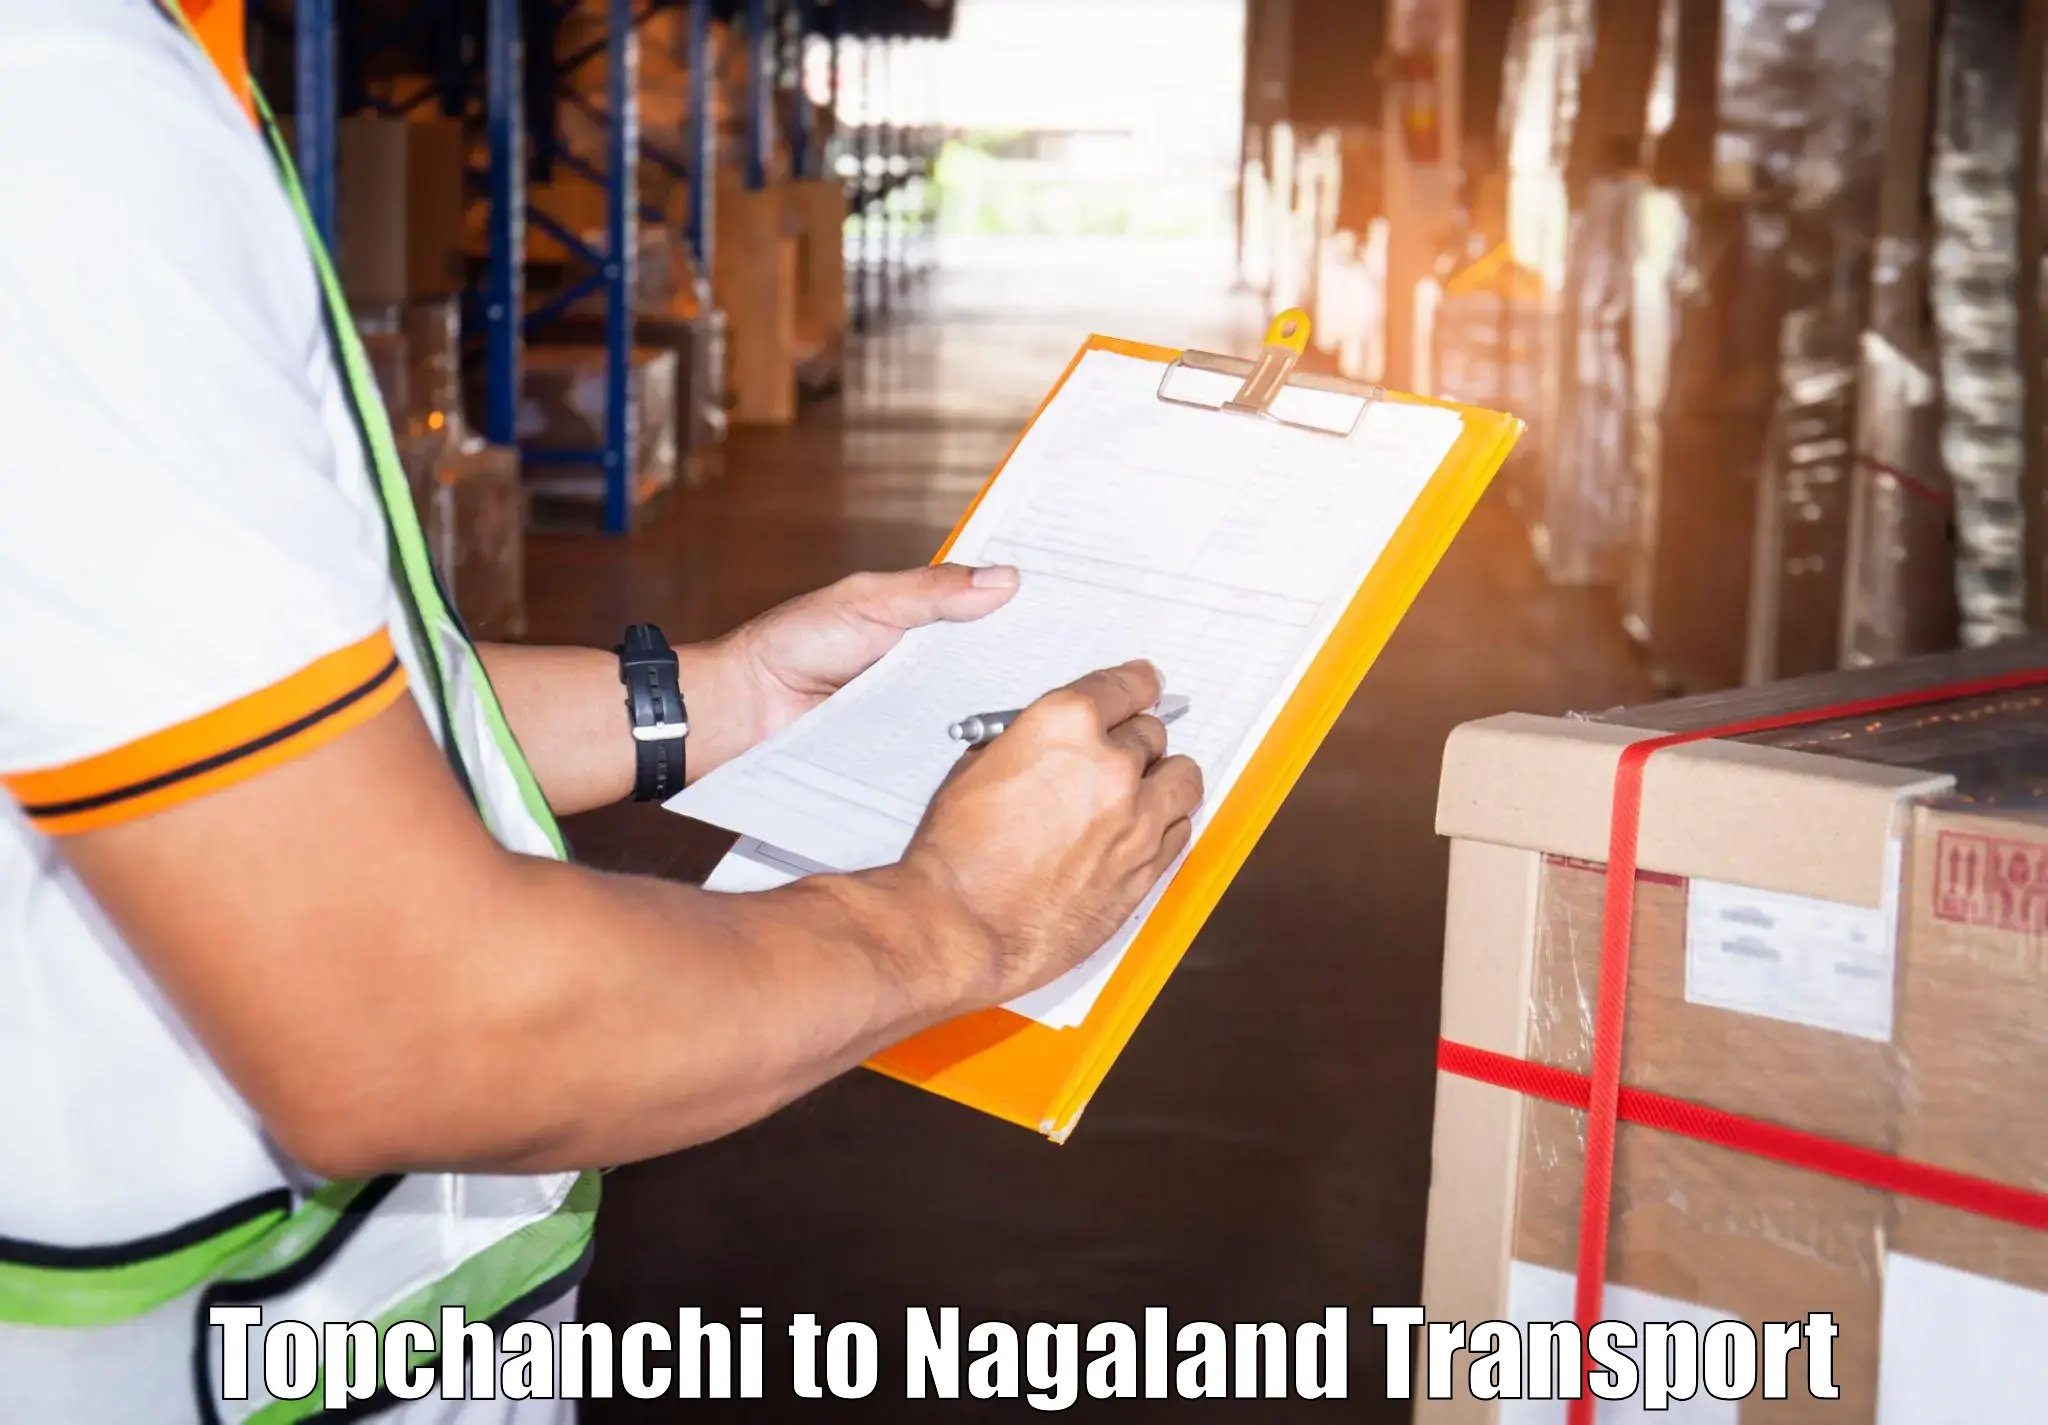 Commercial transport service Topchanchi to Nagaland